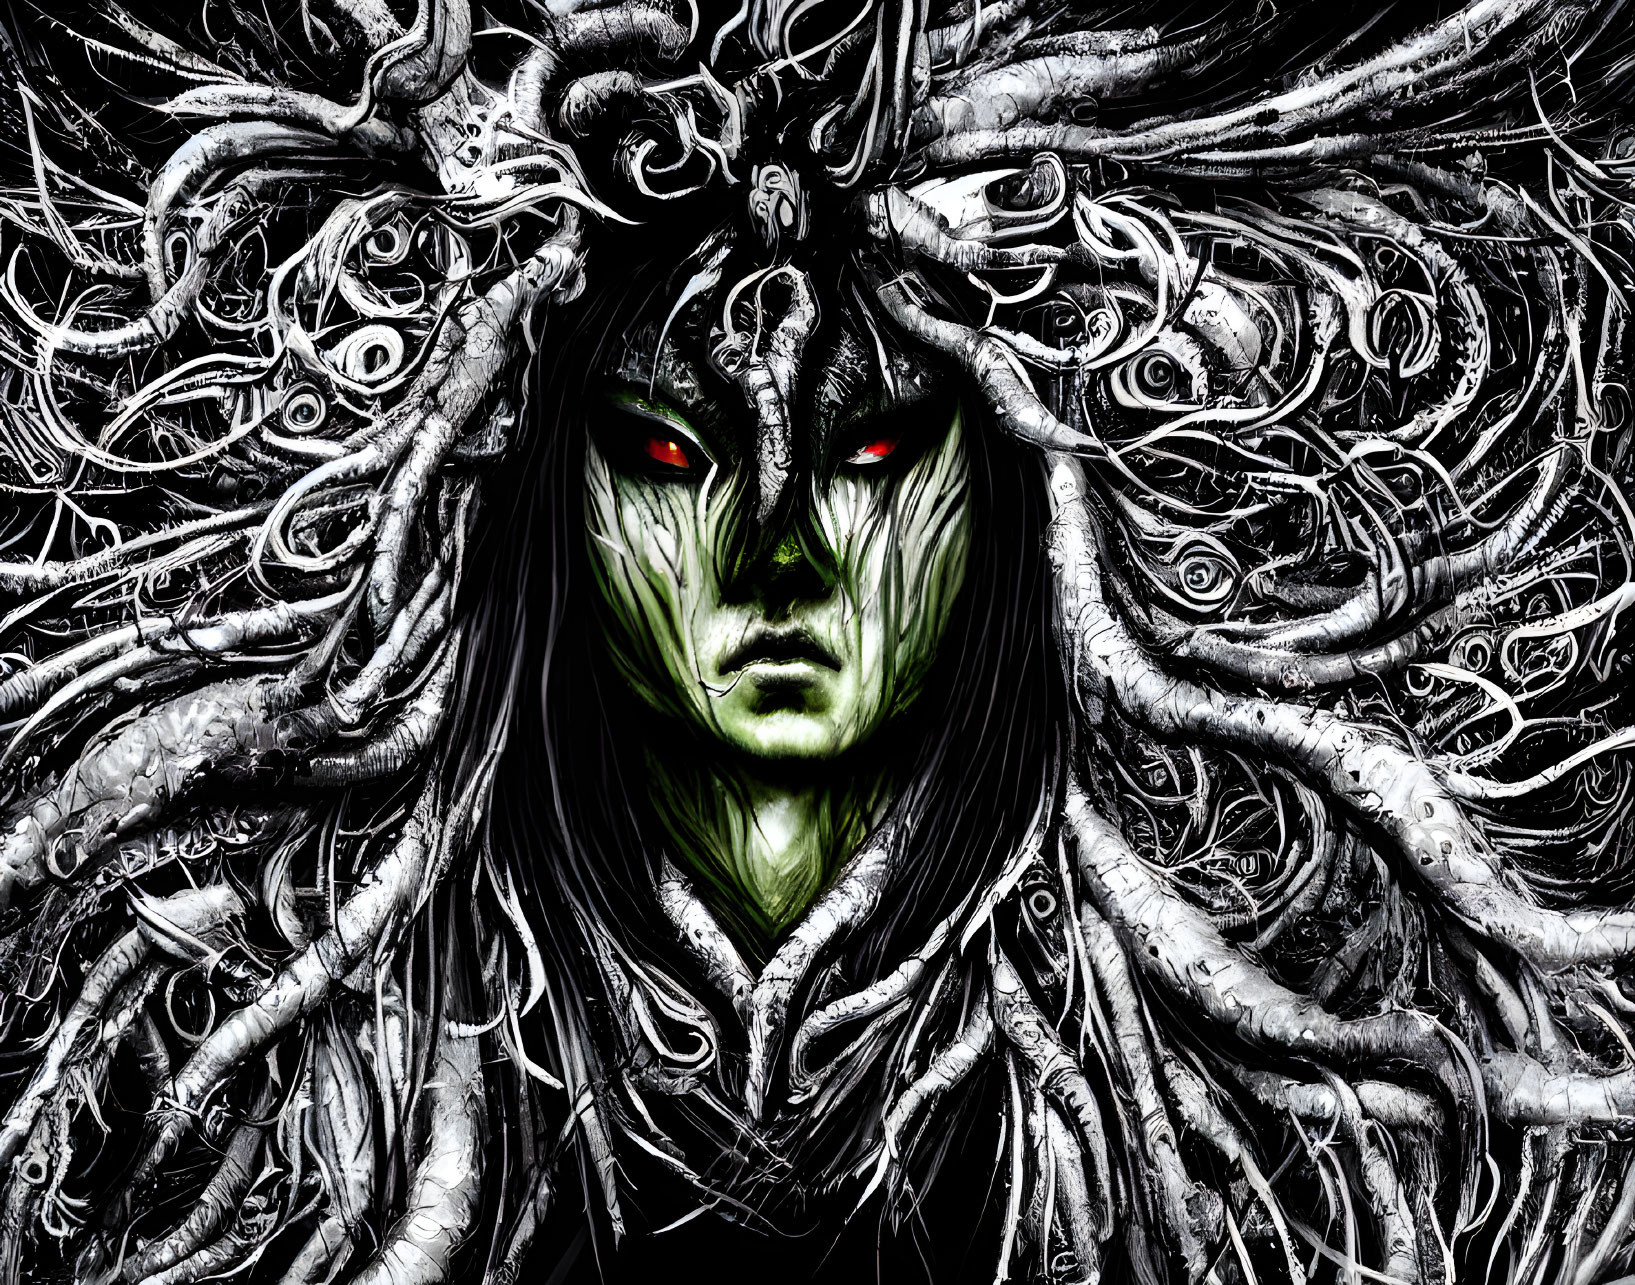 Green-skinned figure with red eyes in chaotic black and white backdrop